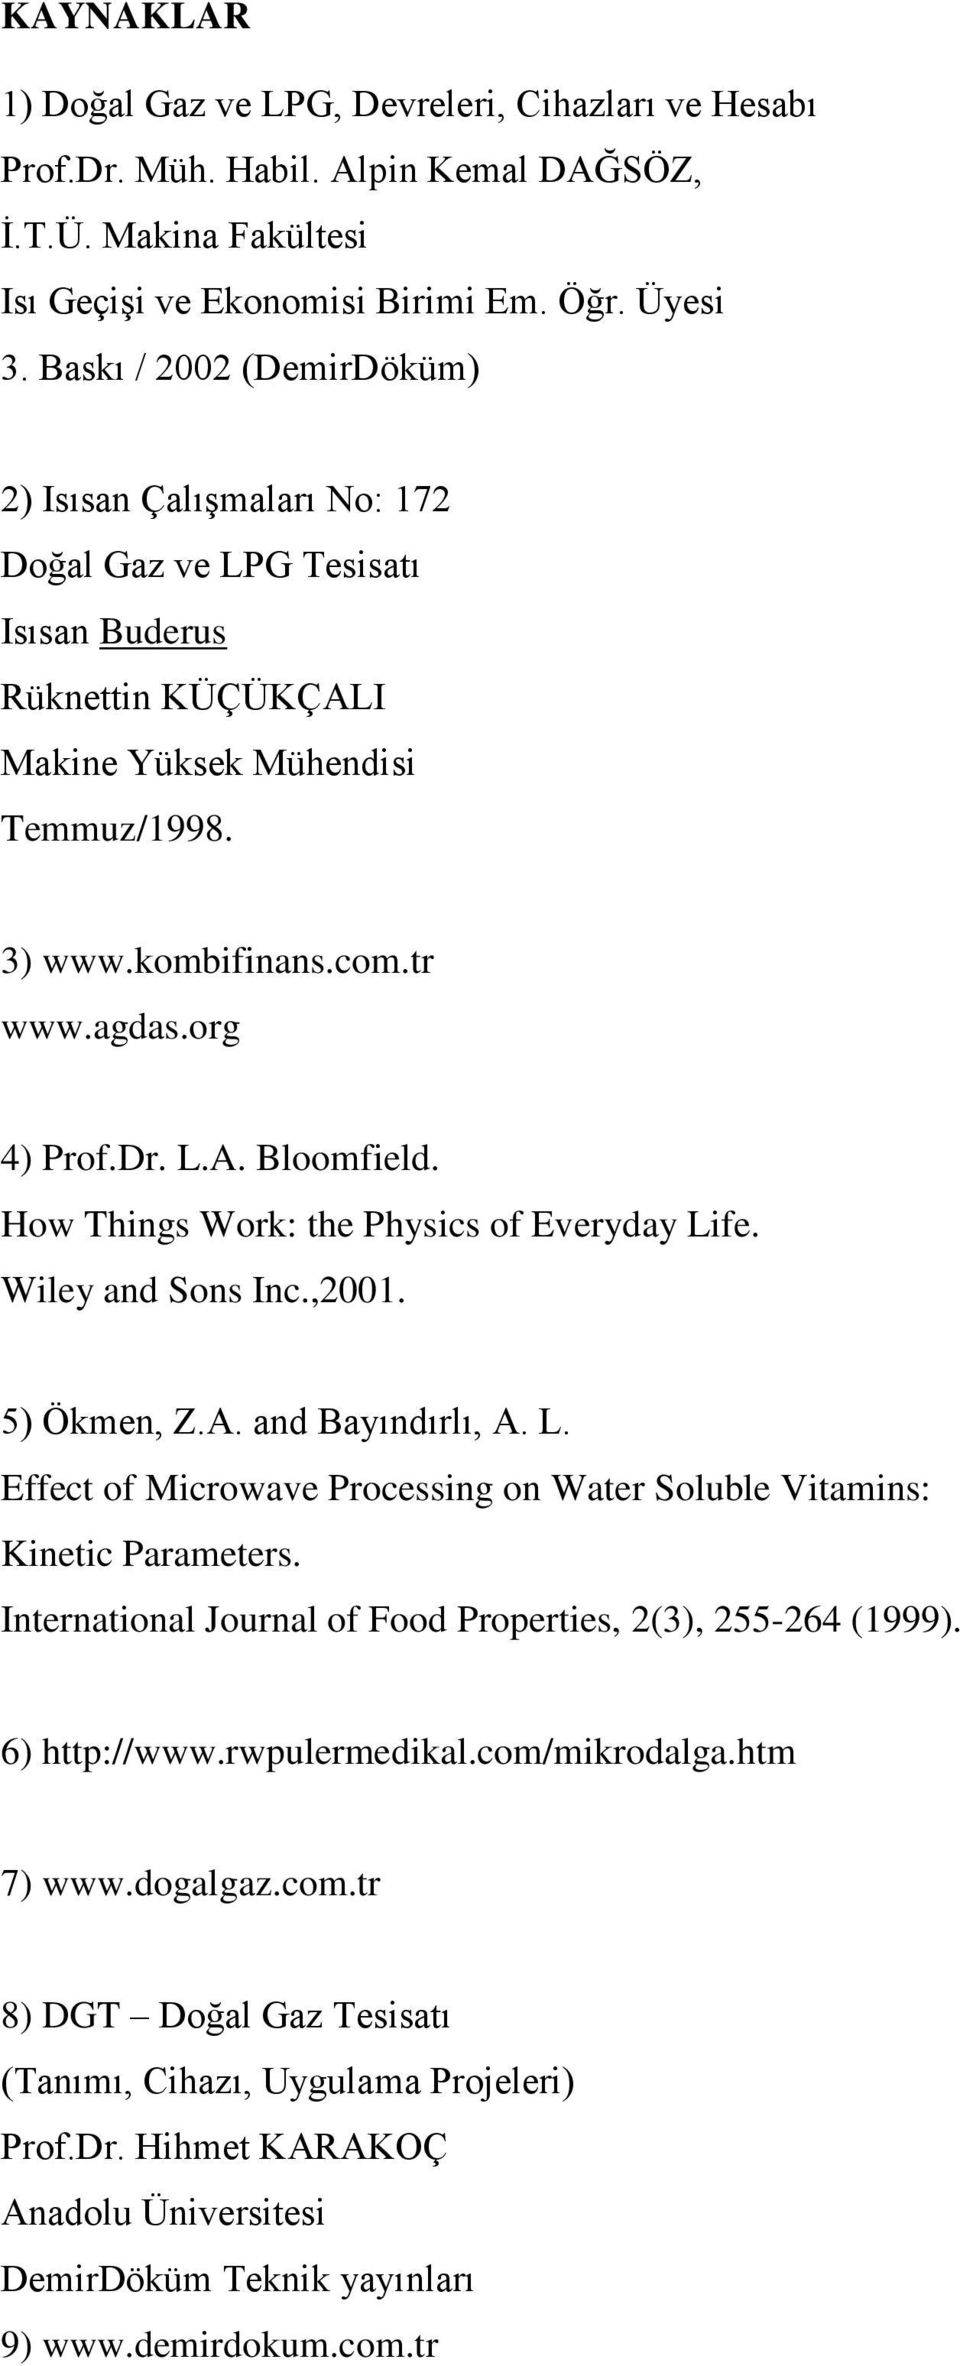 org 4) Prof.Dr. L.A. Bloomfield. How Things Work: the Physics of Everyday Life. Wiley and Sons Inc.,2001. 5) Ökmen, Z.A. and Bayındırlı, A. L. Effect of Microwave Processing on Water Soluble Vitamins: Kinetic Parameters.